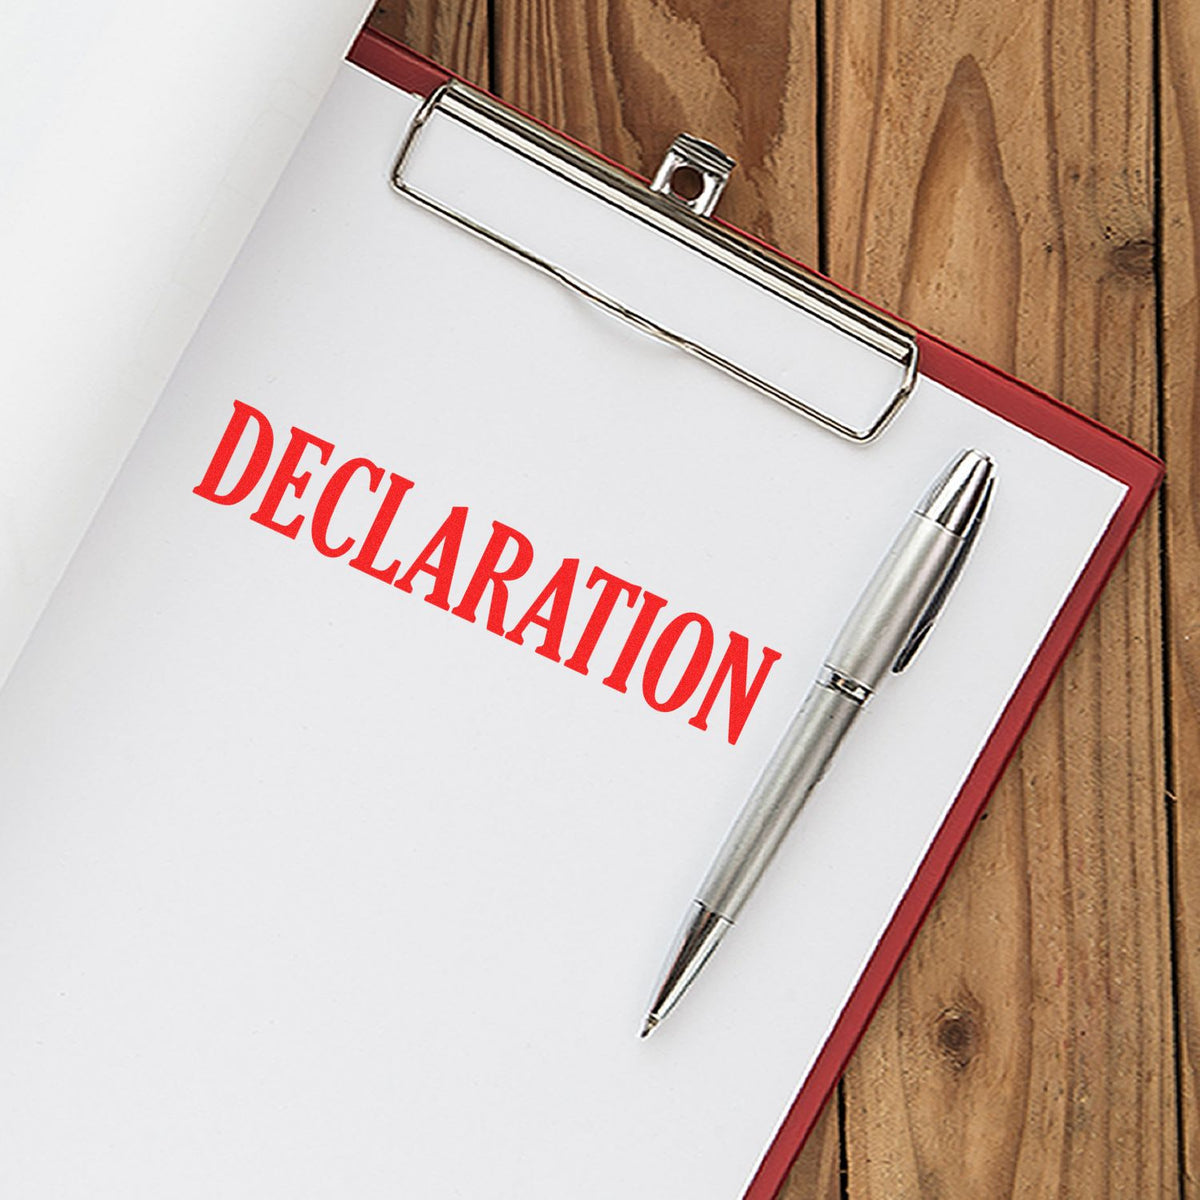 Large Declaration Rubber Stamp In Use Photo